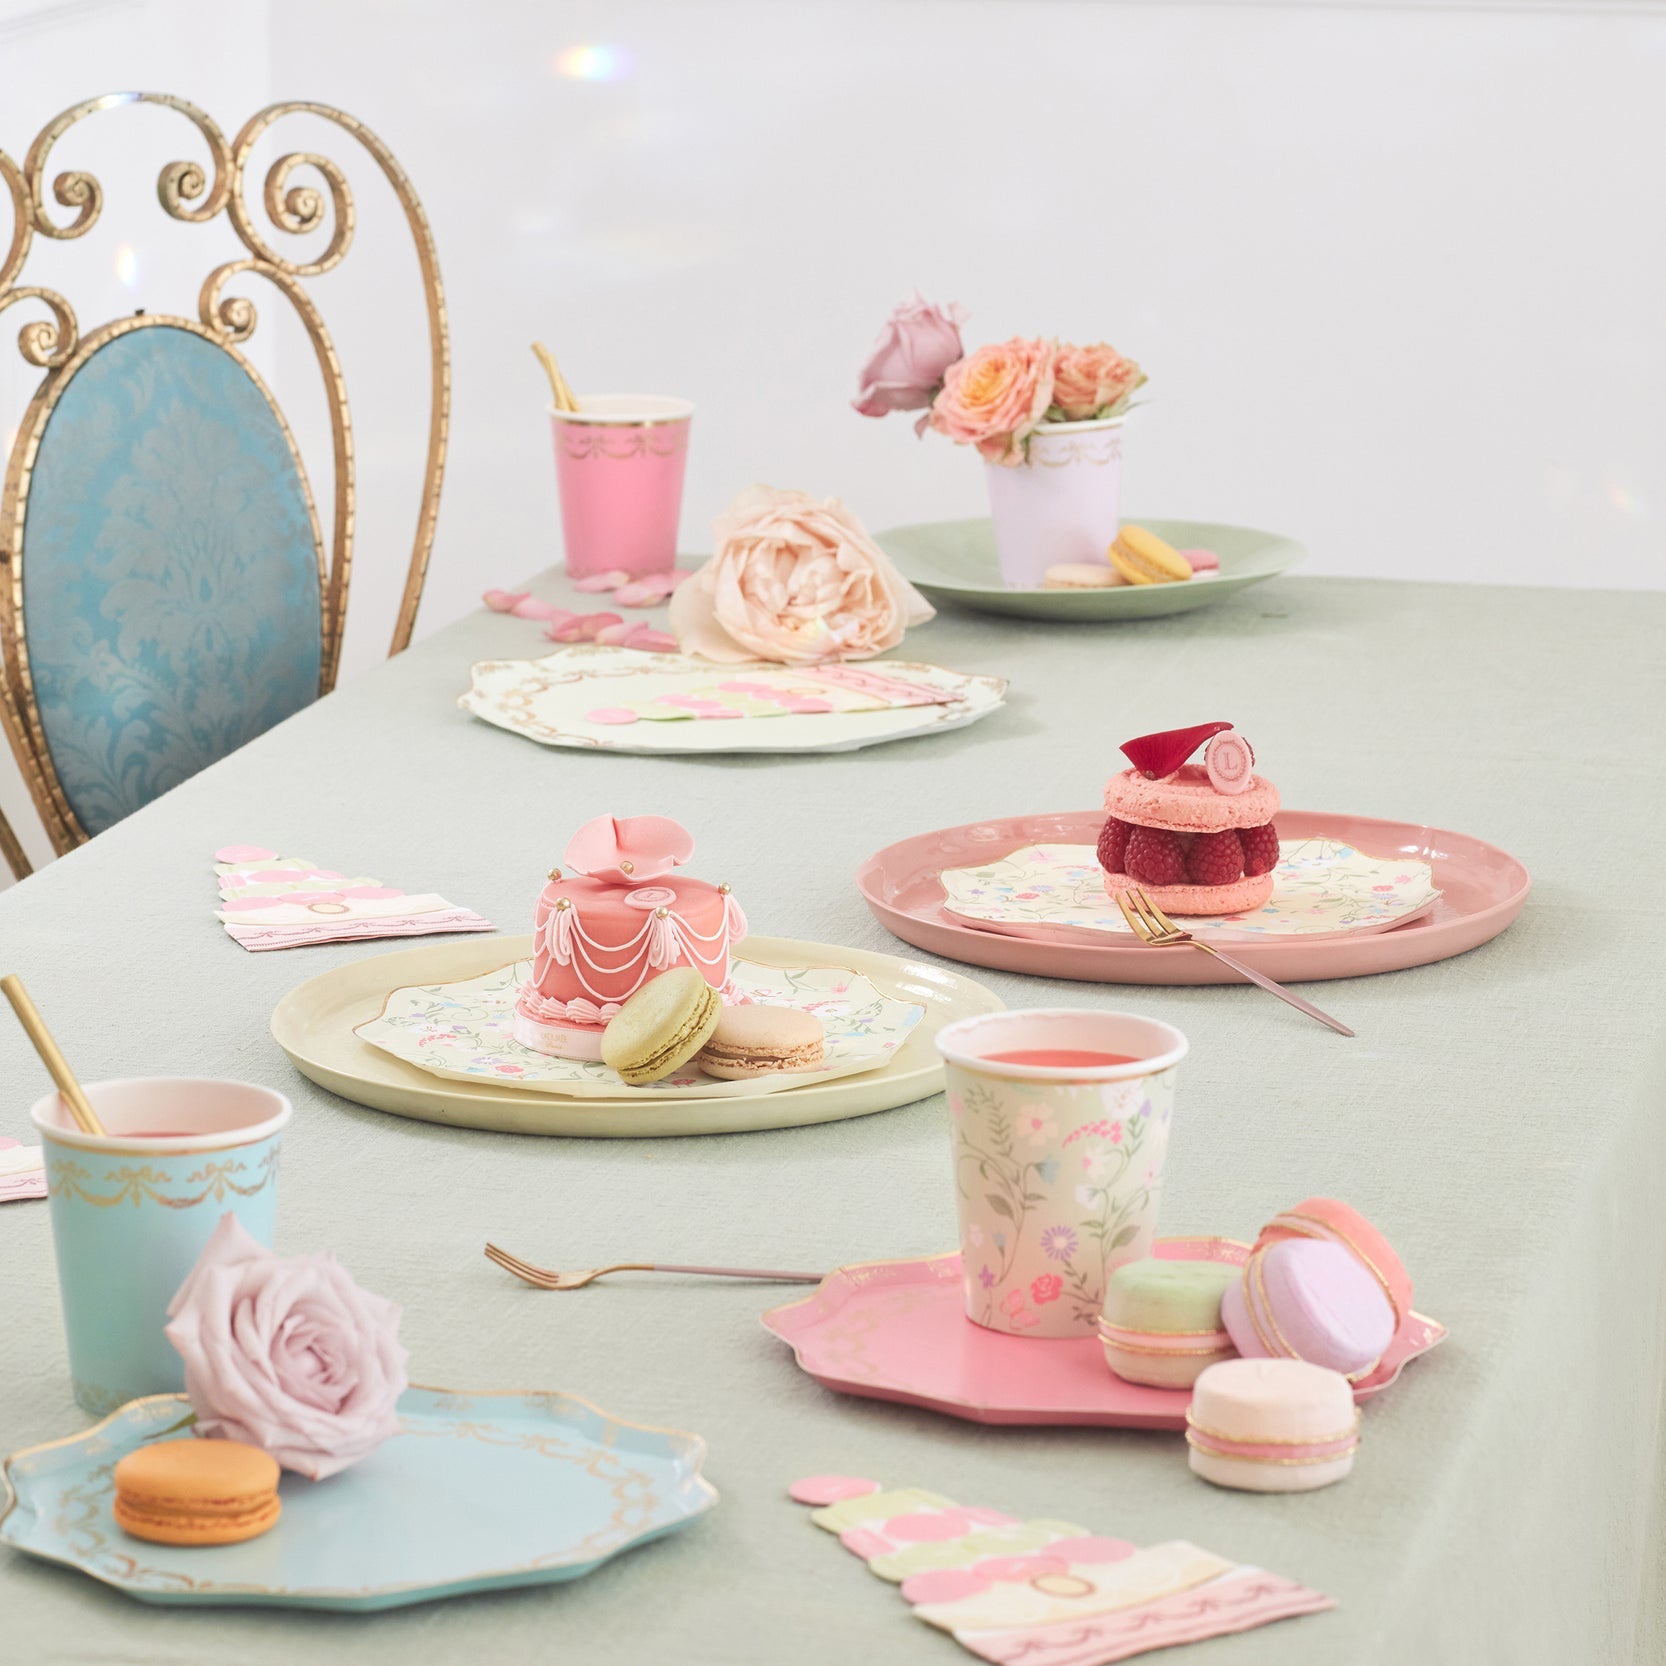 A table set with Ladurée Paris cups and desserts, creating a collaborative display reminiscent of a Meri Meri setting.